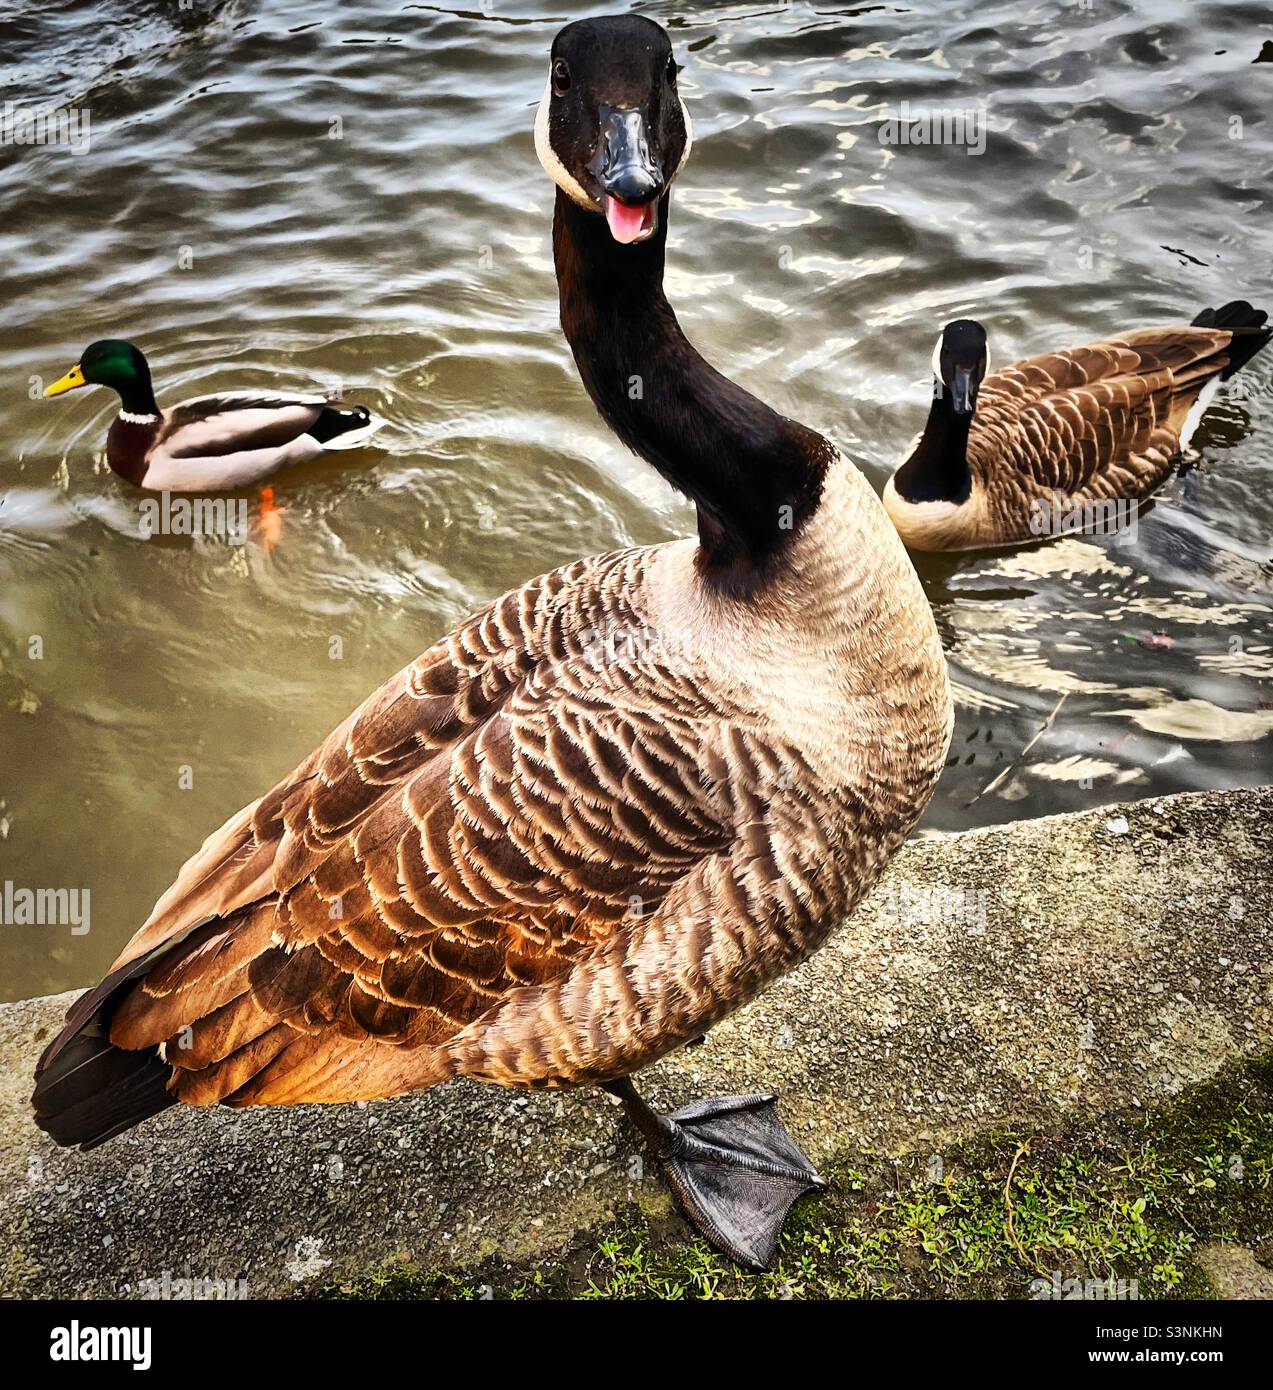 ‘No Pictures Please’ a Canada Goose is less than impressed with having its picture taken and hisses at the camera. His friend looks on as a Mallard Duck minds its own business Stock Photo